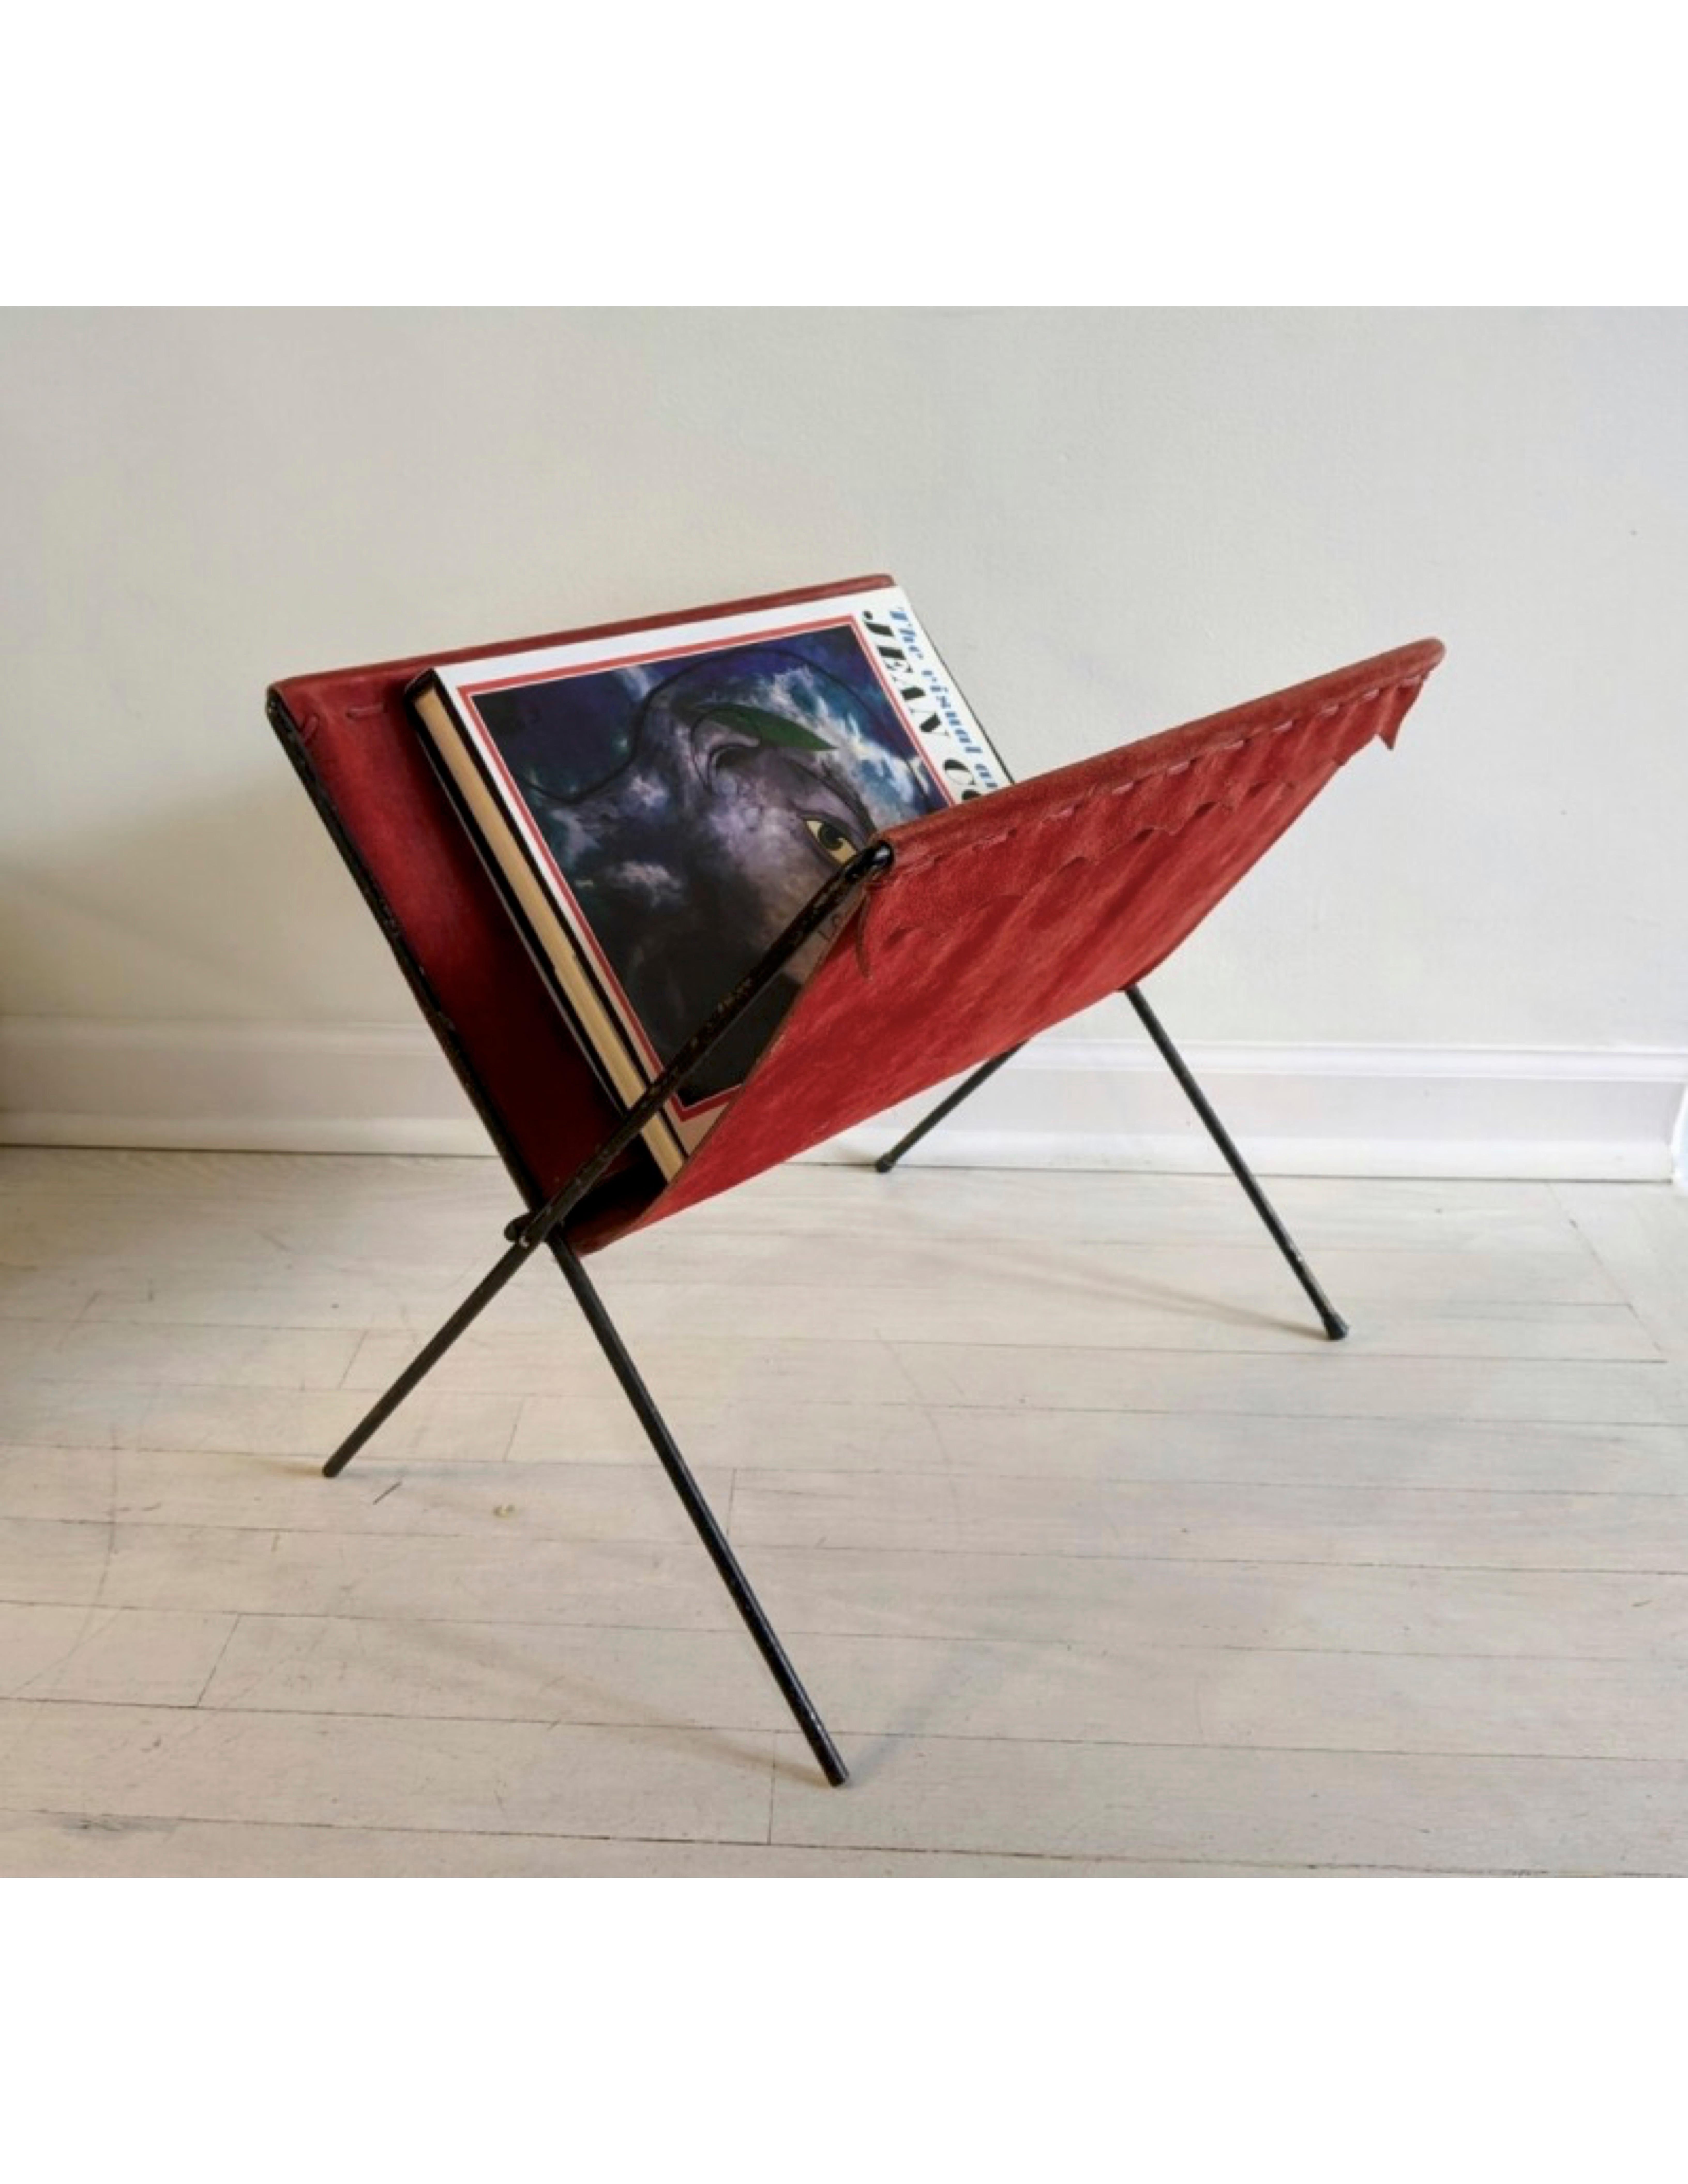 Foldable vintage magazine/book rack made out of red suede and black iron frame. Weave and scallop detail along top edge. Sourced in France.